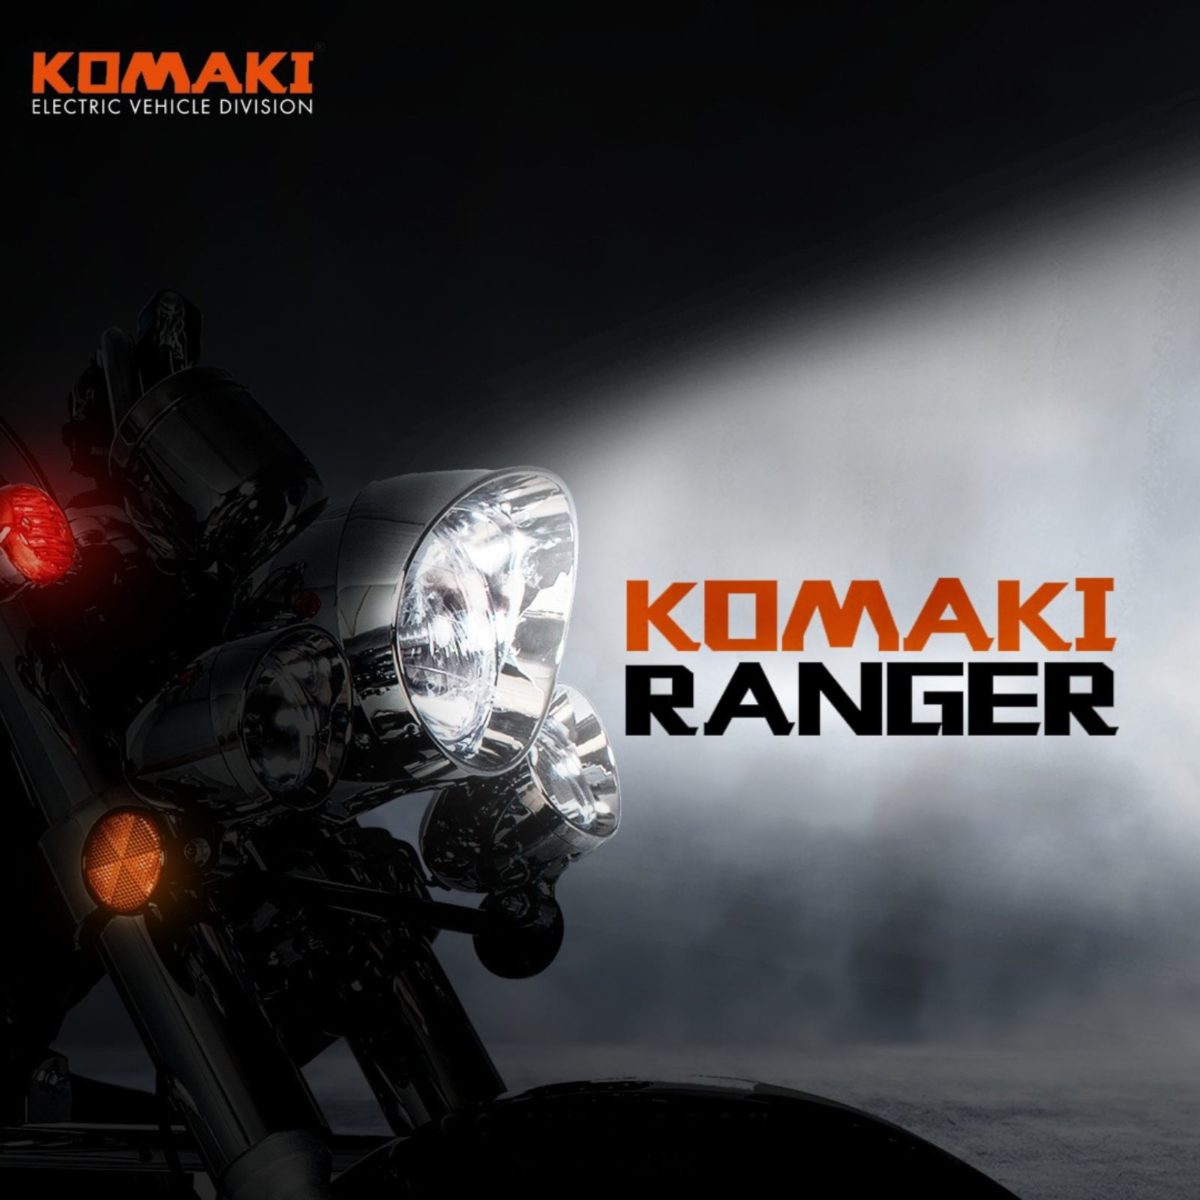 Komaki Ranger's Bike, Speed, Engine, Price, Safety and Features